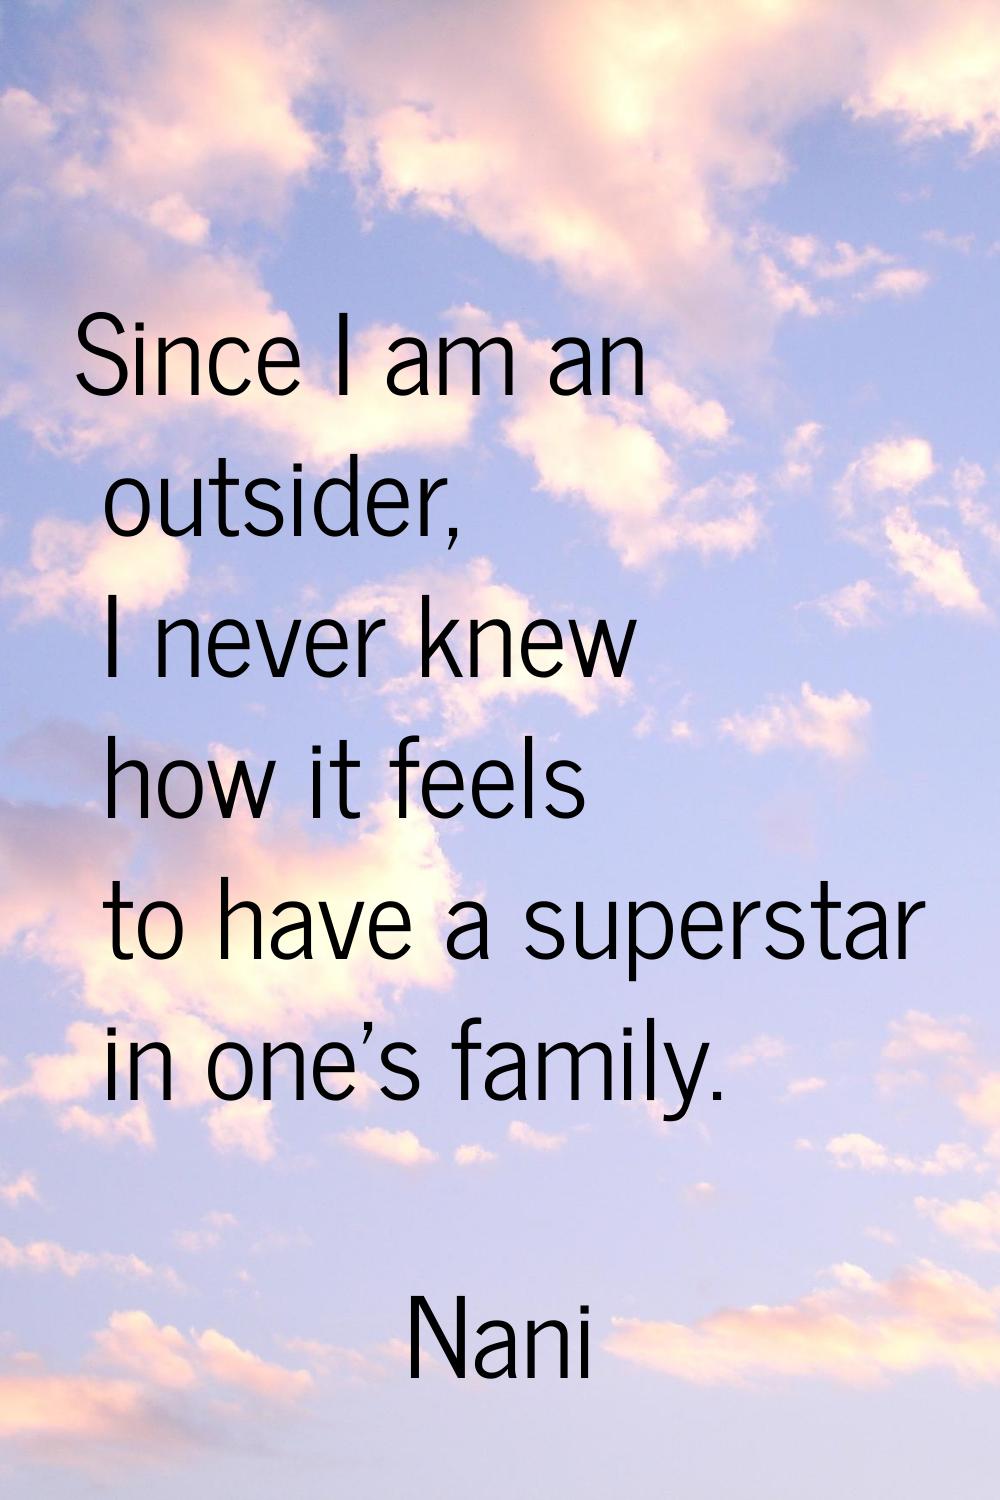 Since I am an outsider, I never knew how it feels to have a superstar in one's family.